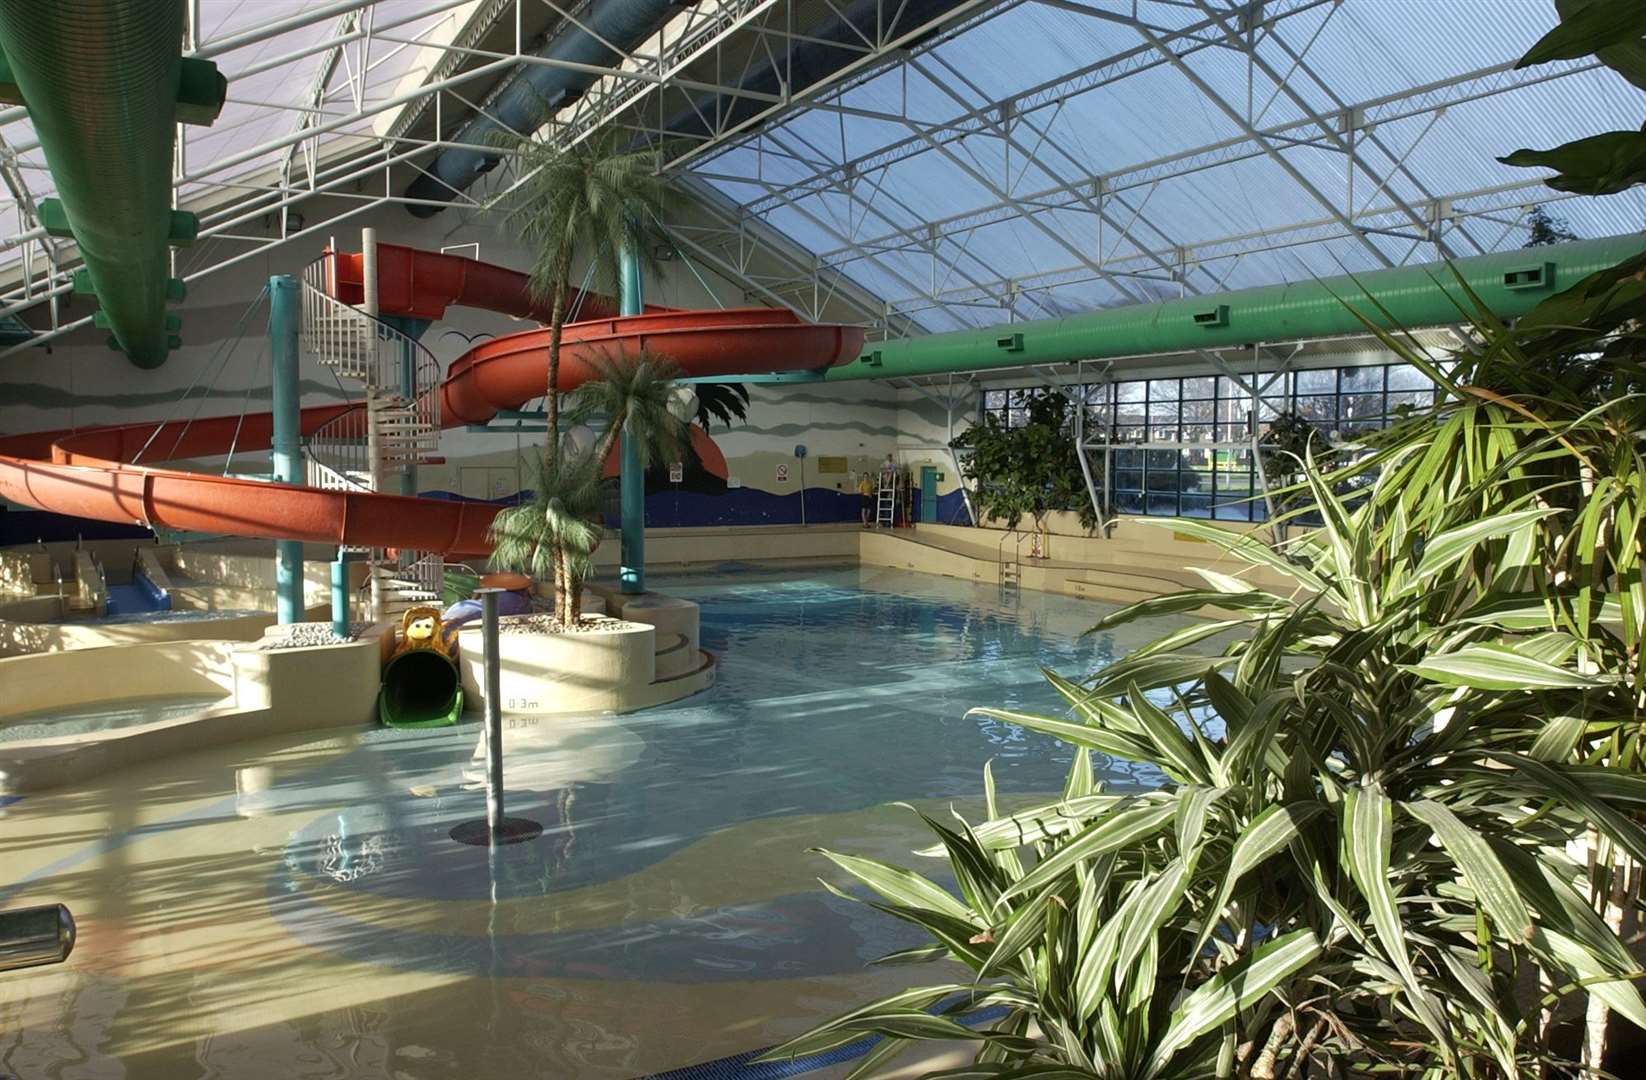 Tides Leisure Centre will be demolished except for the sports halls and tennis centre